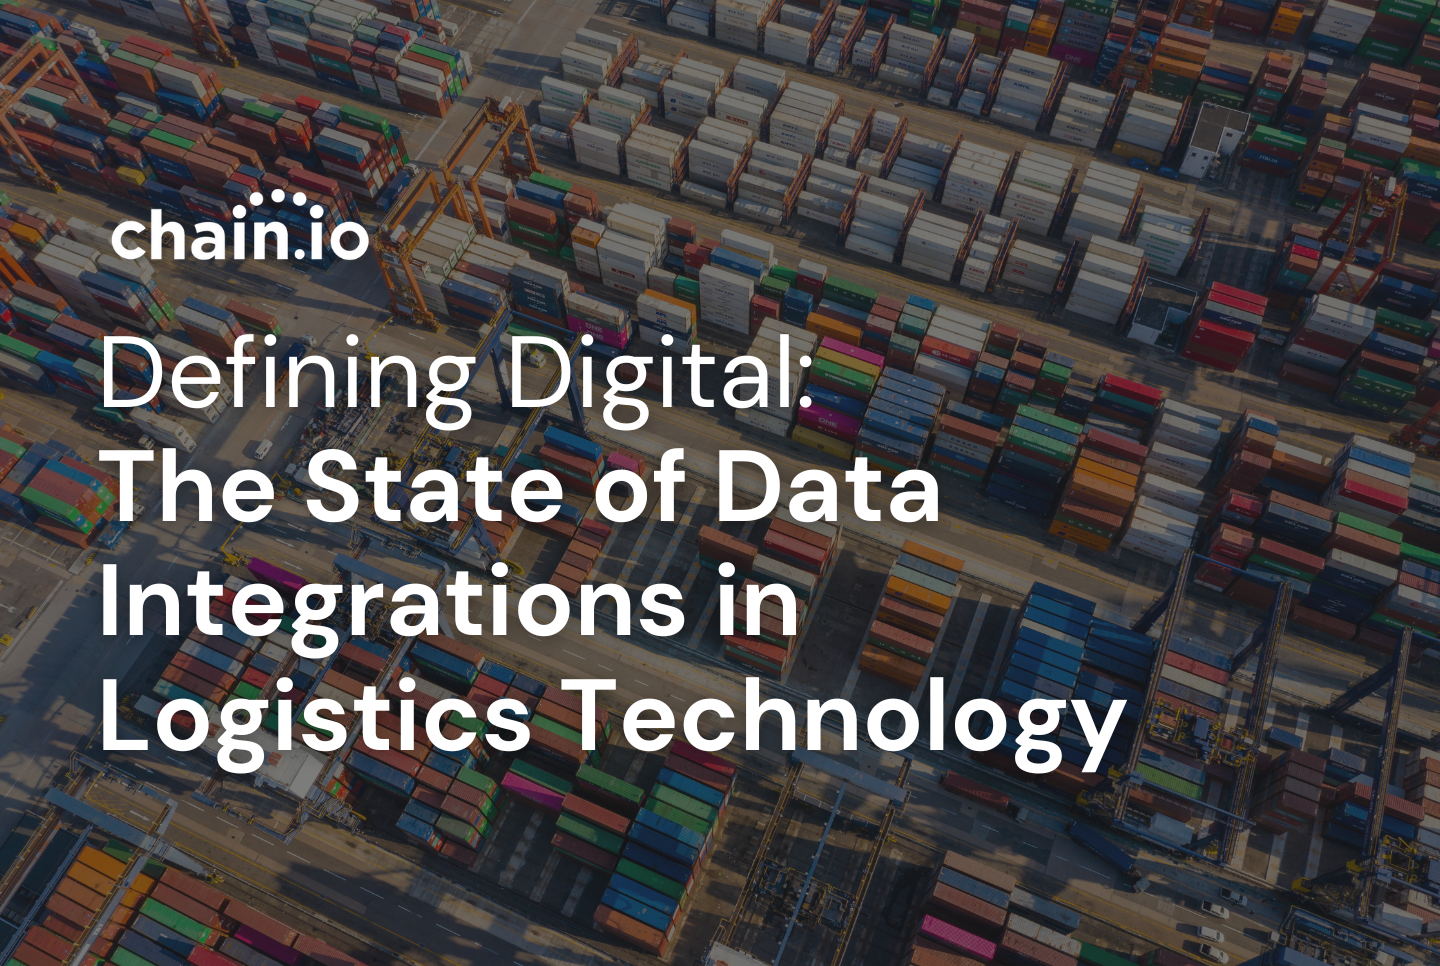 Defining Digital: The State of Data Integrations in Logistics Technology